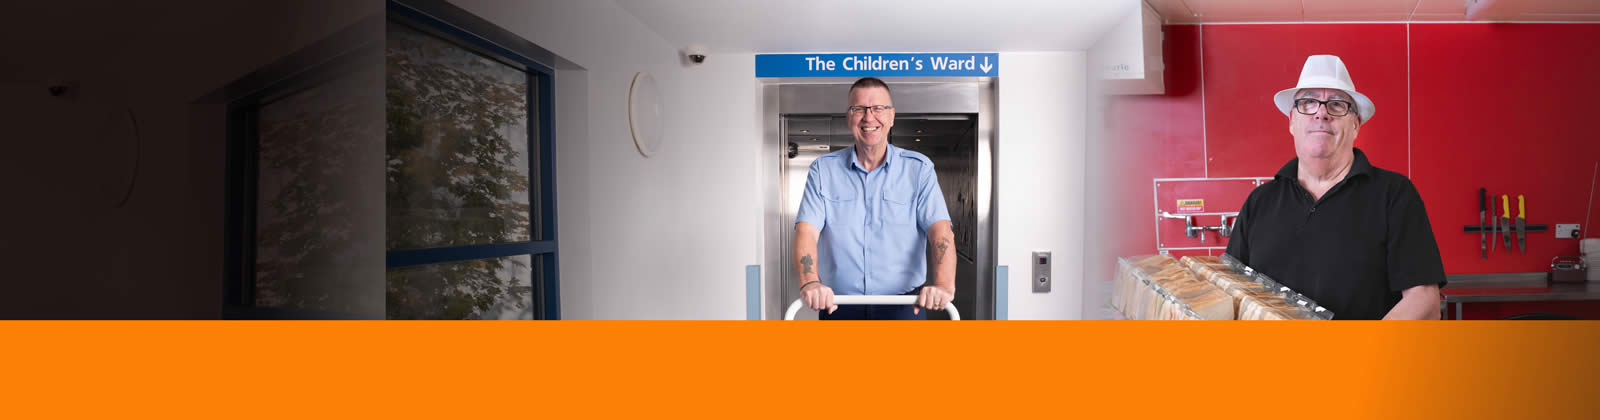 Porter pushing trolley from lift door under 'The Children's Ward' sign and man in kitchen with two rows of sandwiches in plastic packets